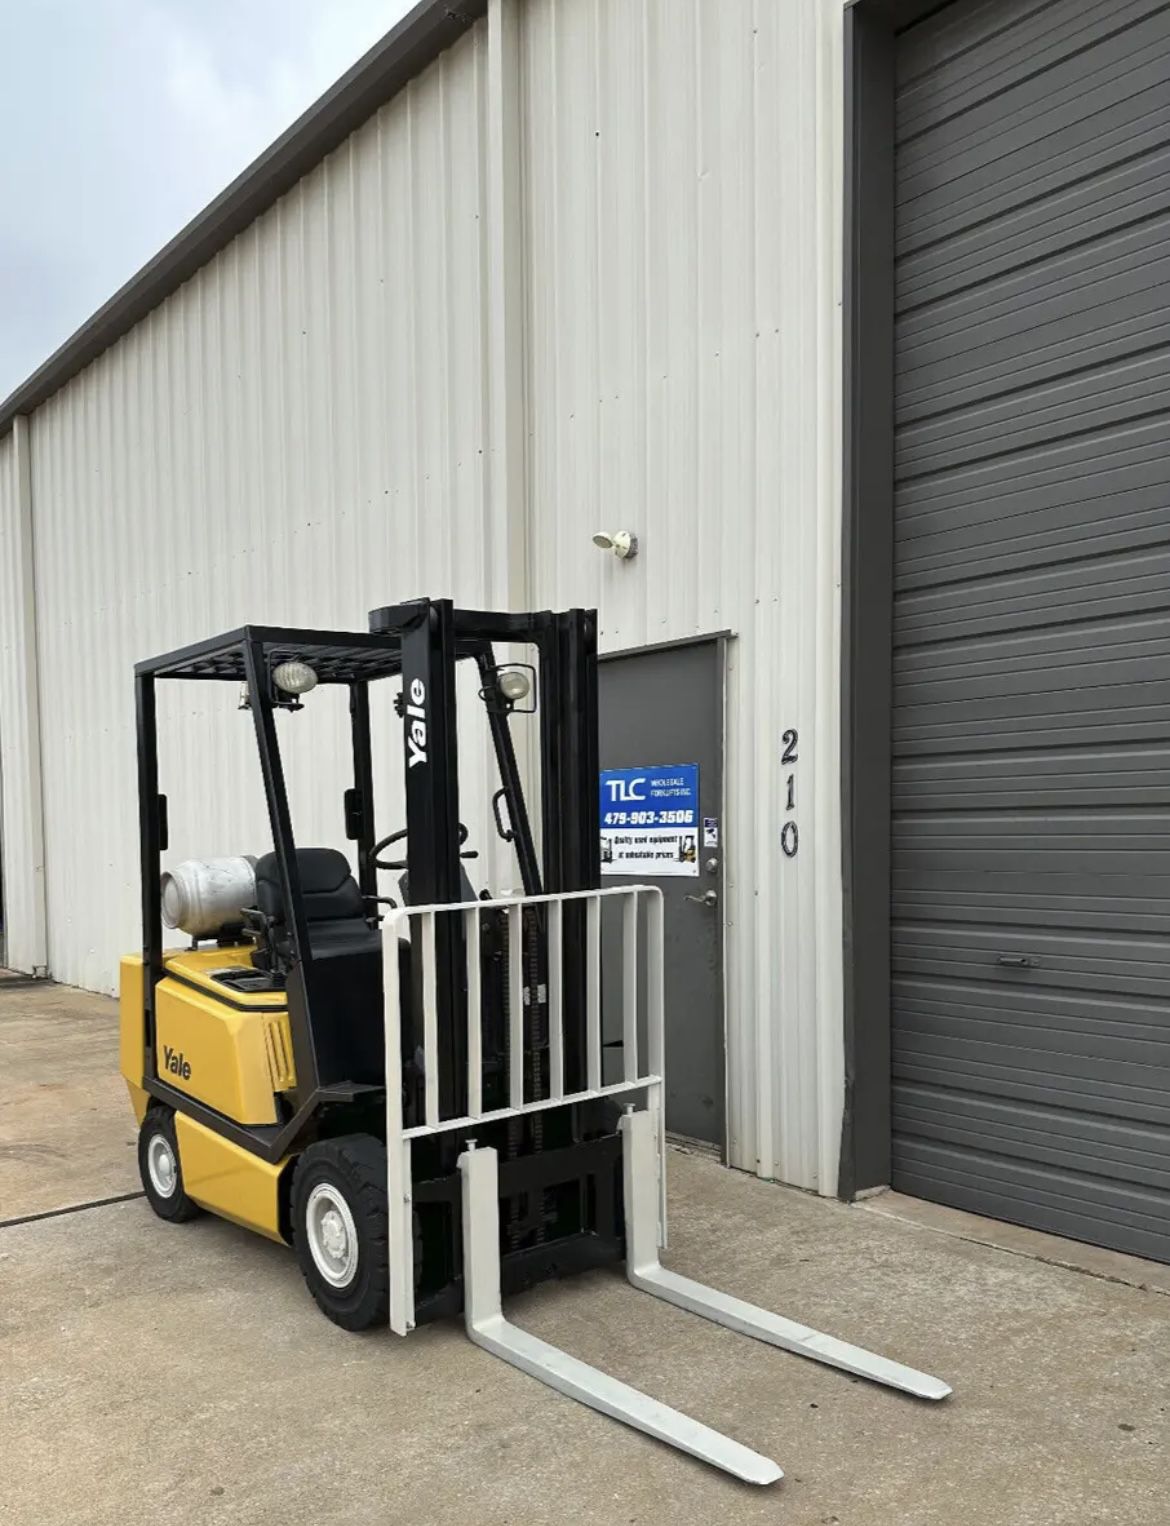 2005 Yale Propane Lift GLP040 - Only 2926 Hours